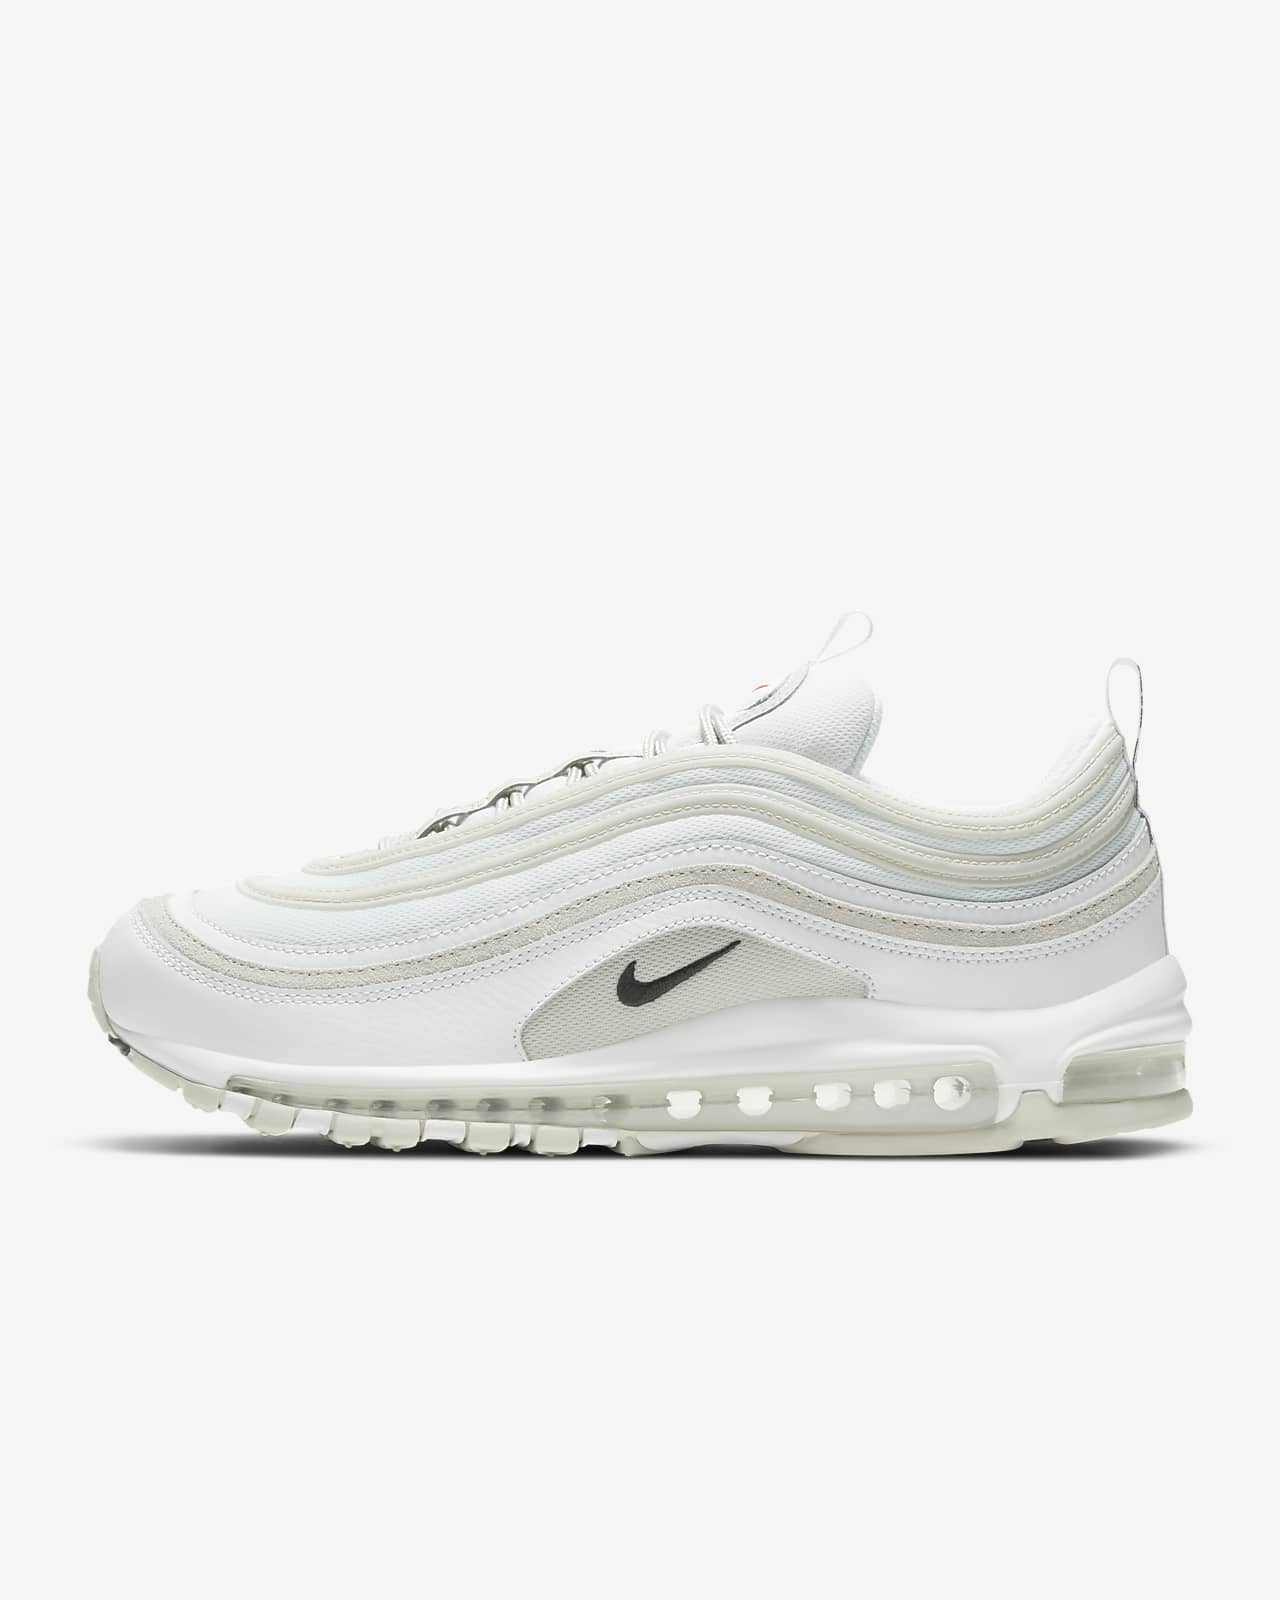 Soldes > nike air max 97 homme blanche > en stock